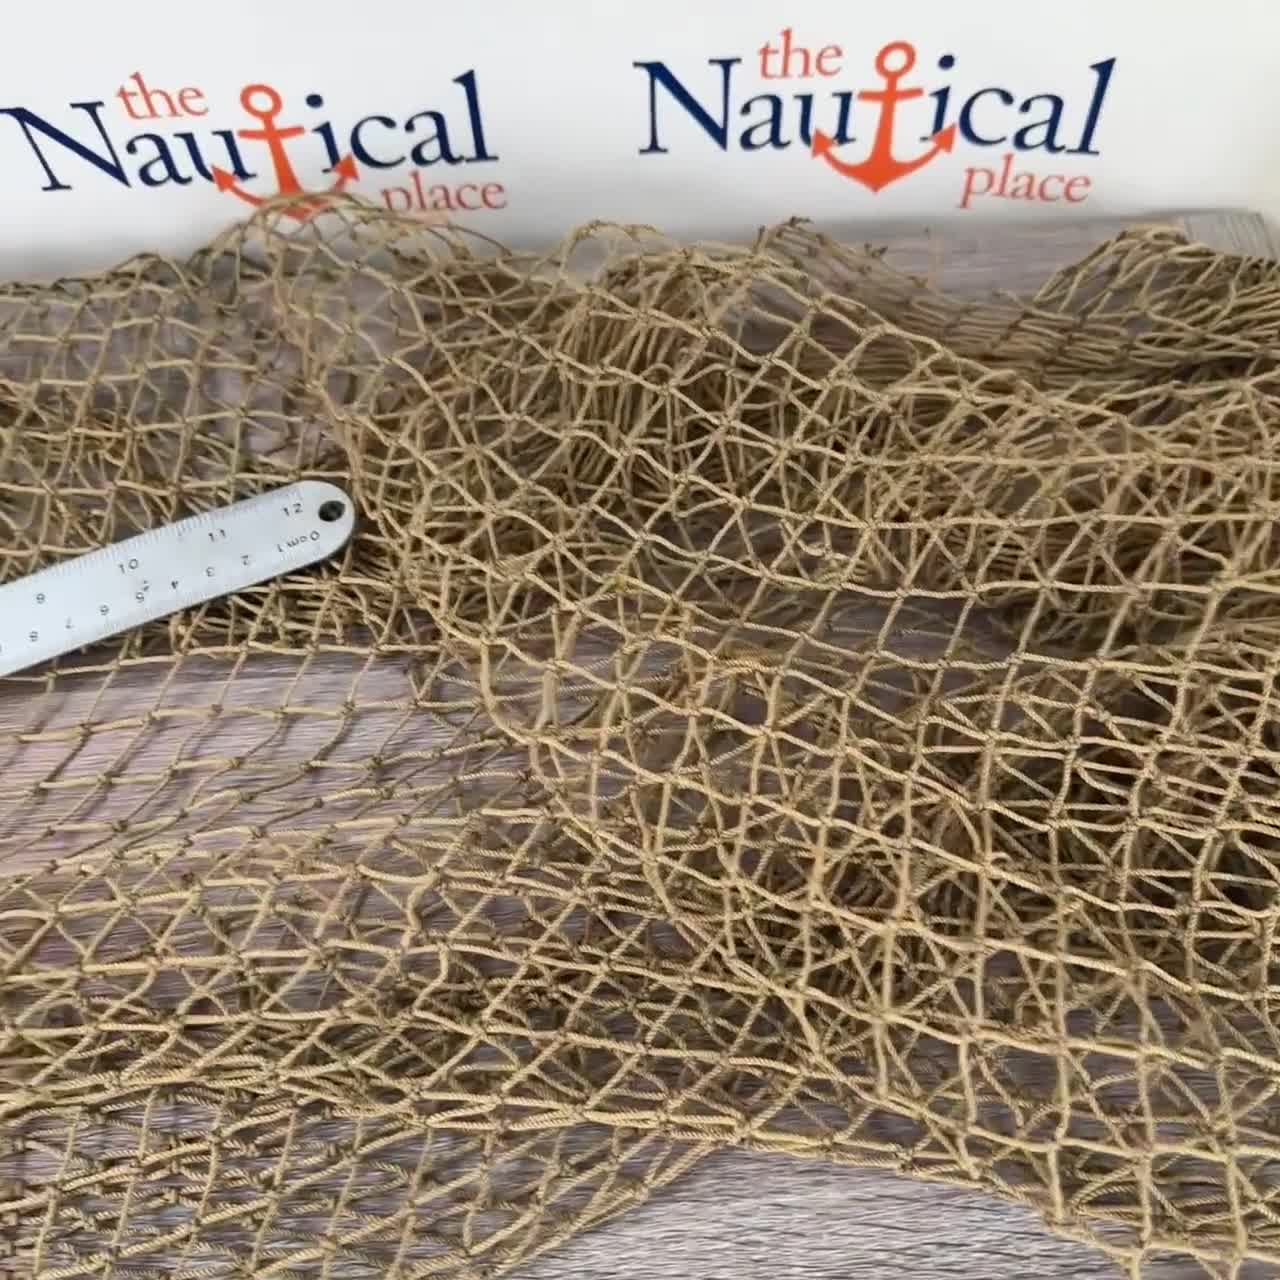 Old Used Fishing Net 2 Ft X 2 Ft Knotted Vintage Fish Netting Nautical  Maritime Beach Room Decor Hermit Crab Climbing Hammock -  Denmark